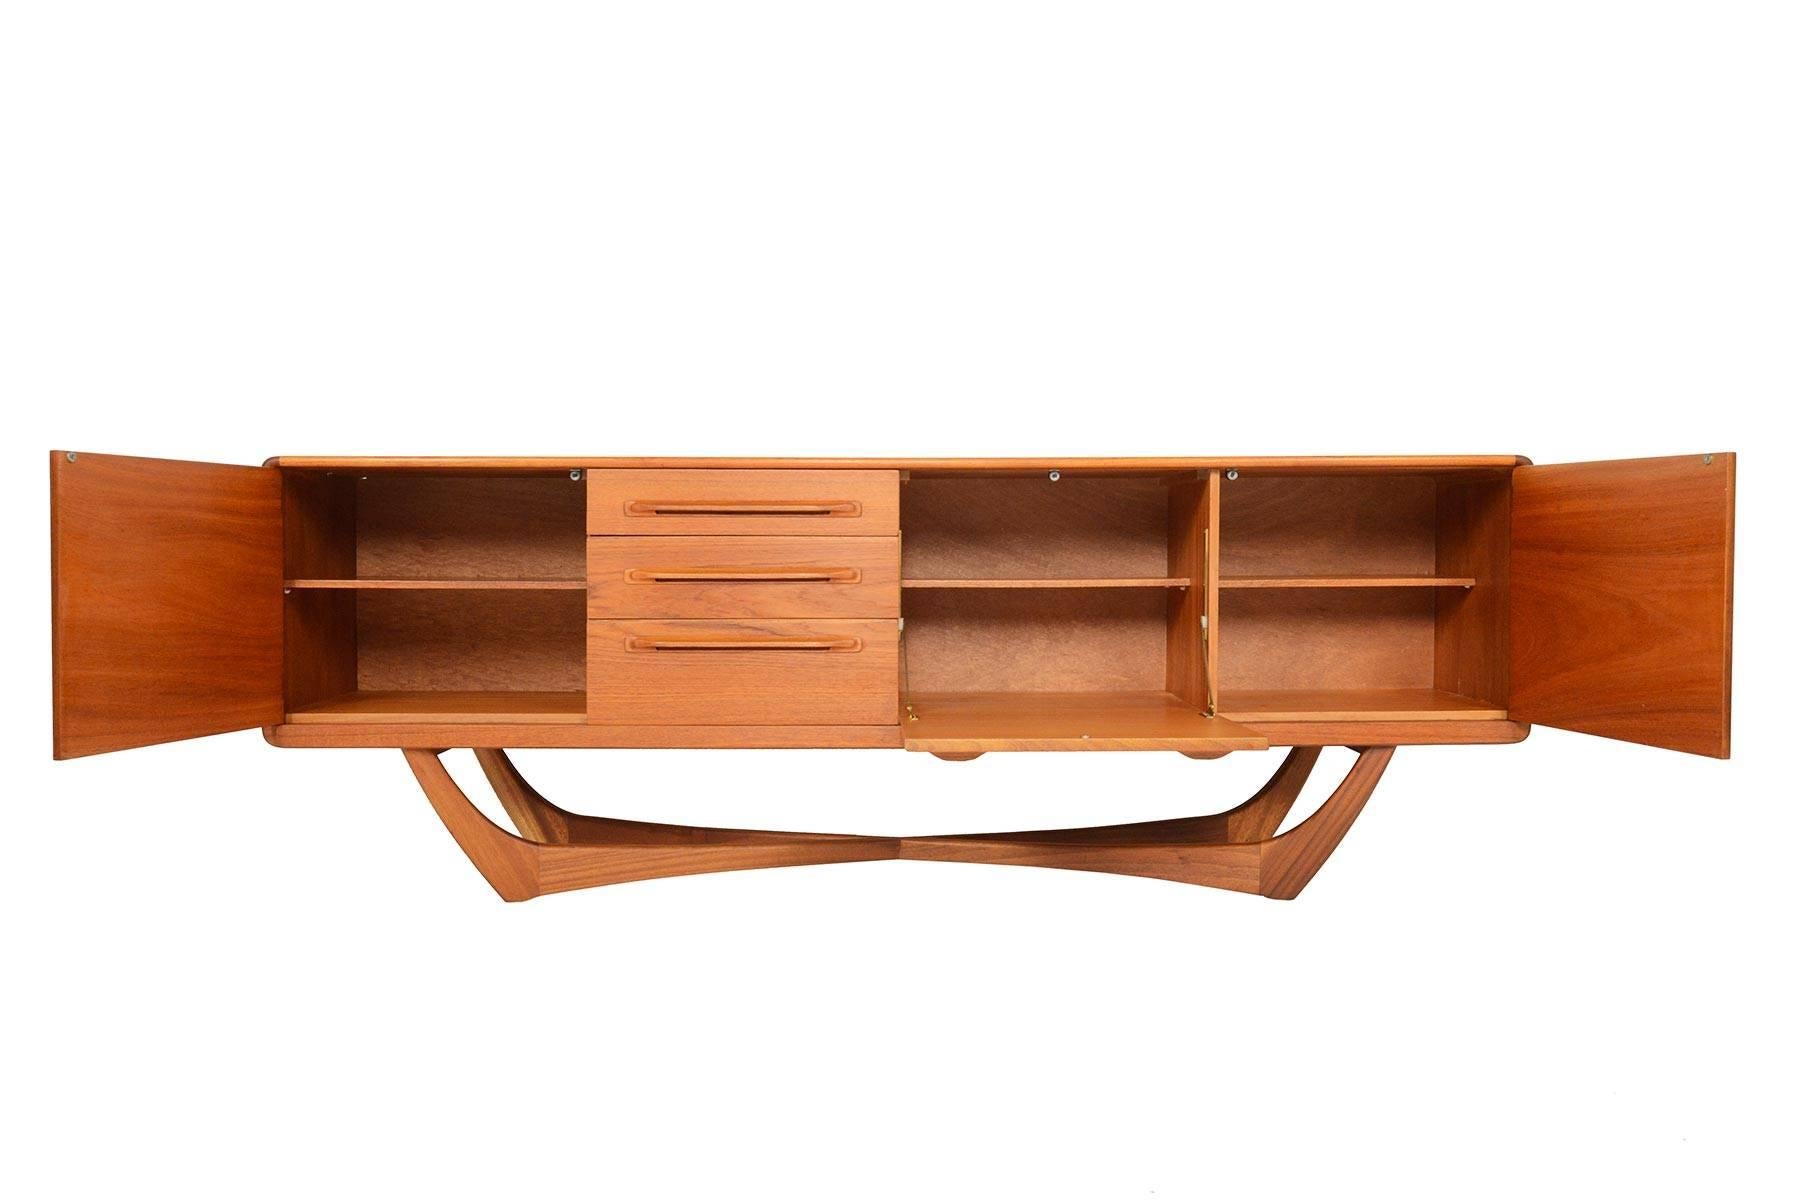 This exceptional Scottish modern teak credenza by Beithcraft is a rare find. The case sits on a dramatic parabolic X-form base. The left and right bays open to reveal a removable shelf. The center bar drops down to provide a serving platform. A bank